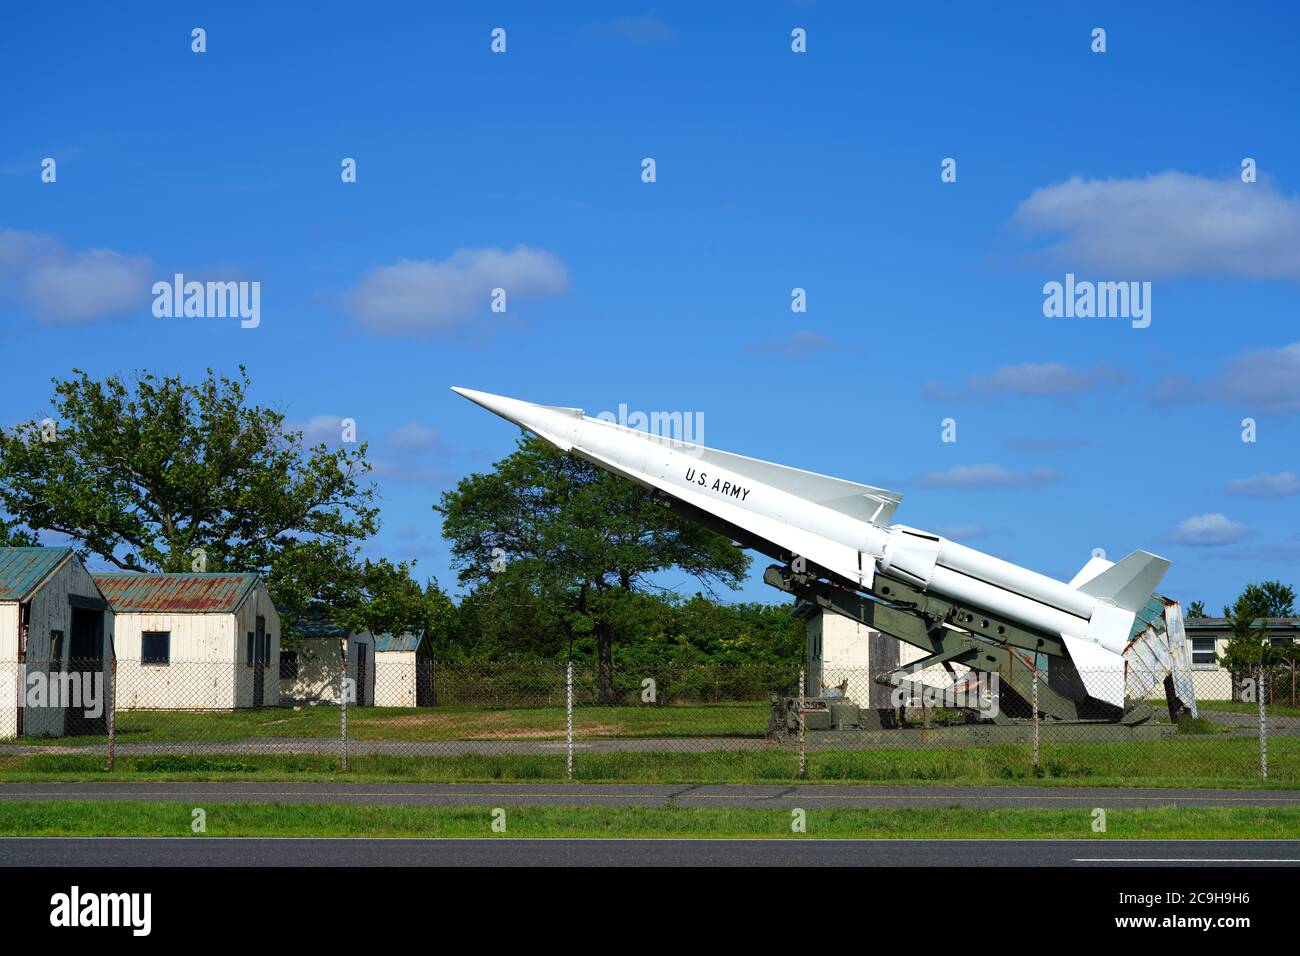 SANDY HOOK, NK –16 JUL 2020- of Nike missiles located on the grounds Fort Hancock, Gateway National Recreation Area Jersey, United Stat Stock Photo - Alamy